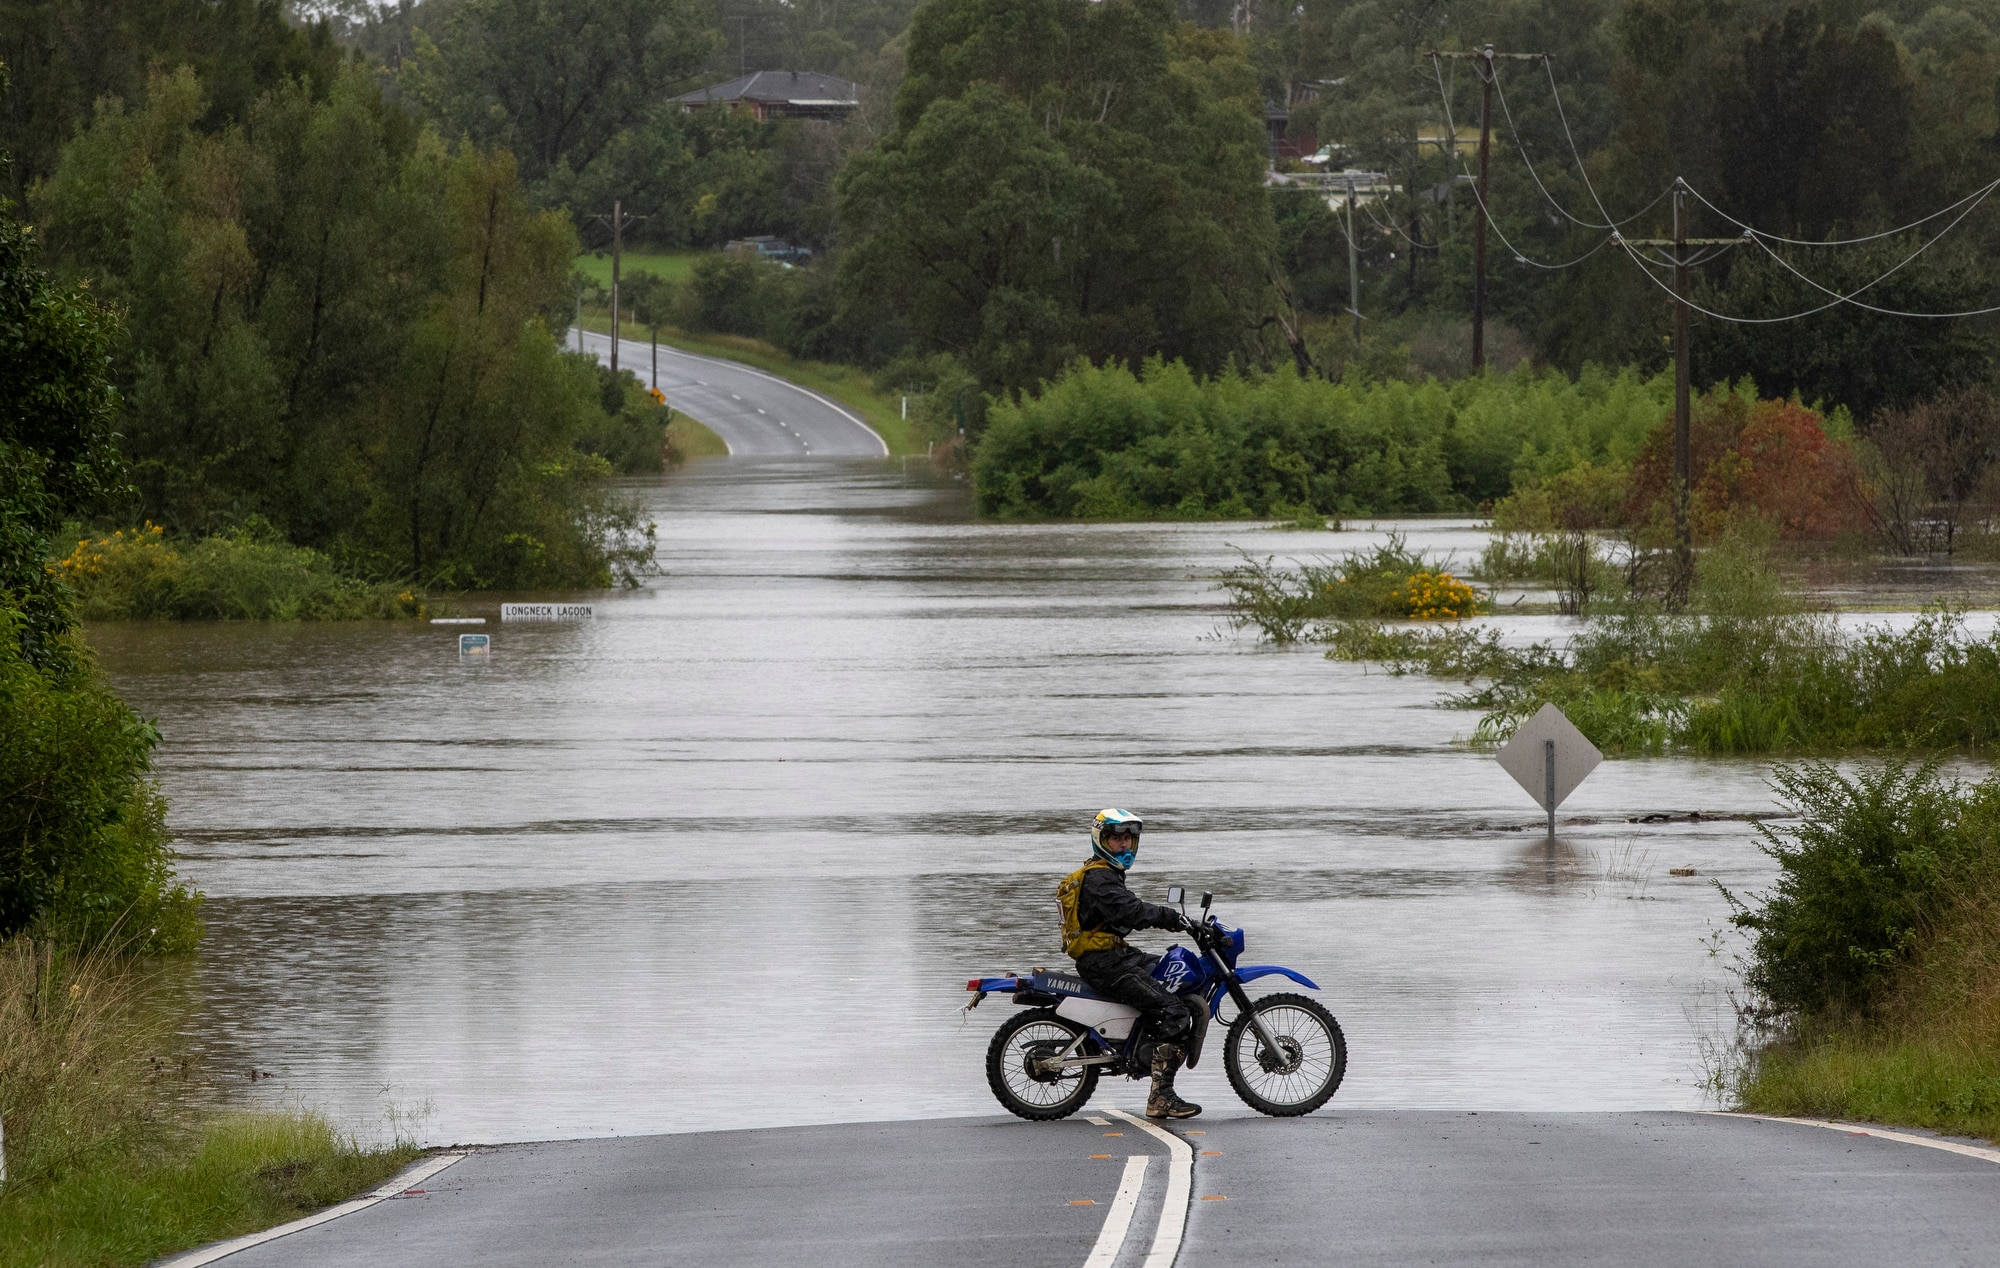 A motorcyclist progress is blocked by a flooded road at Old Pitt Town, north west of Sydney.